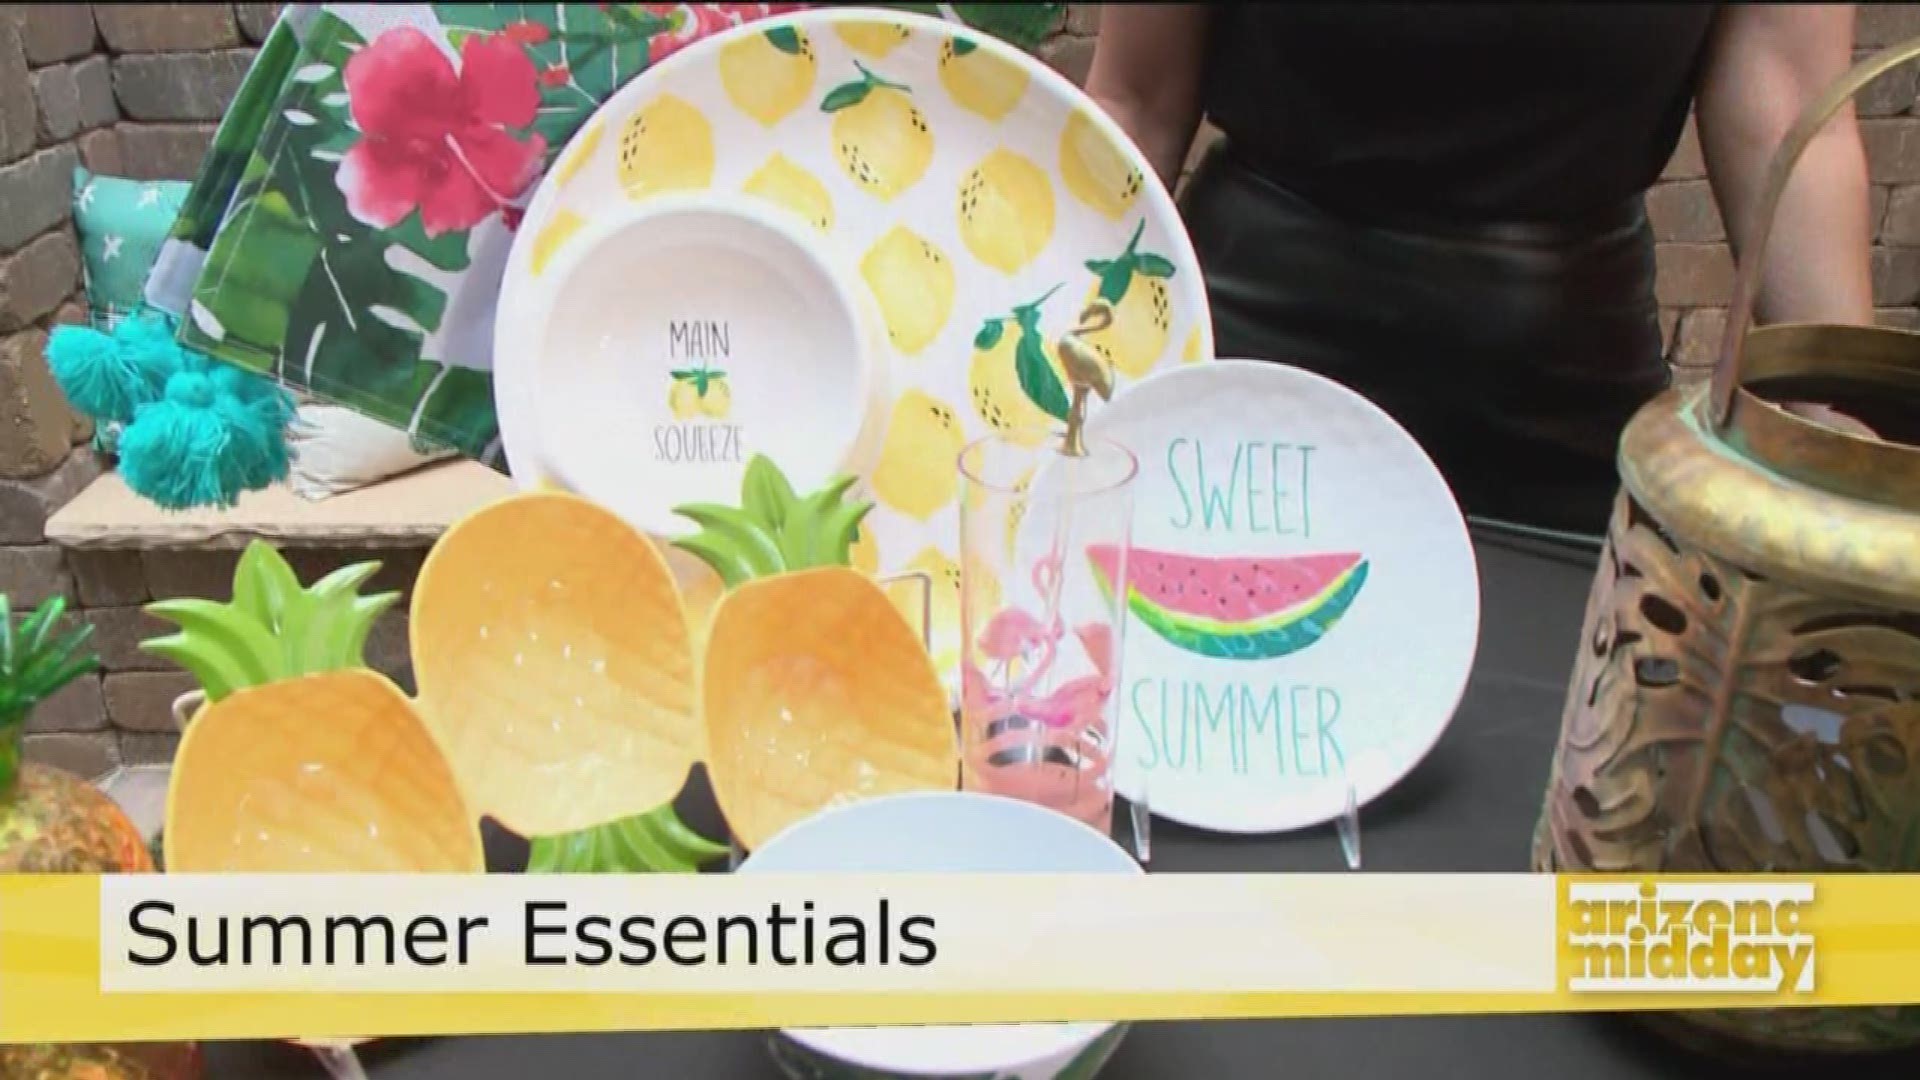 Stacie Coleman with JCPenney is sharing cute new ways to decorate and entertain during the summer